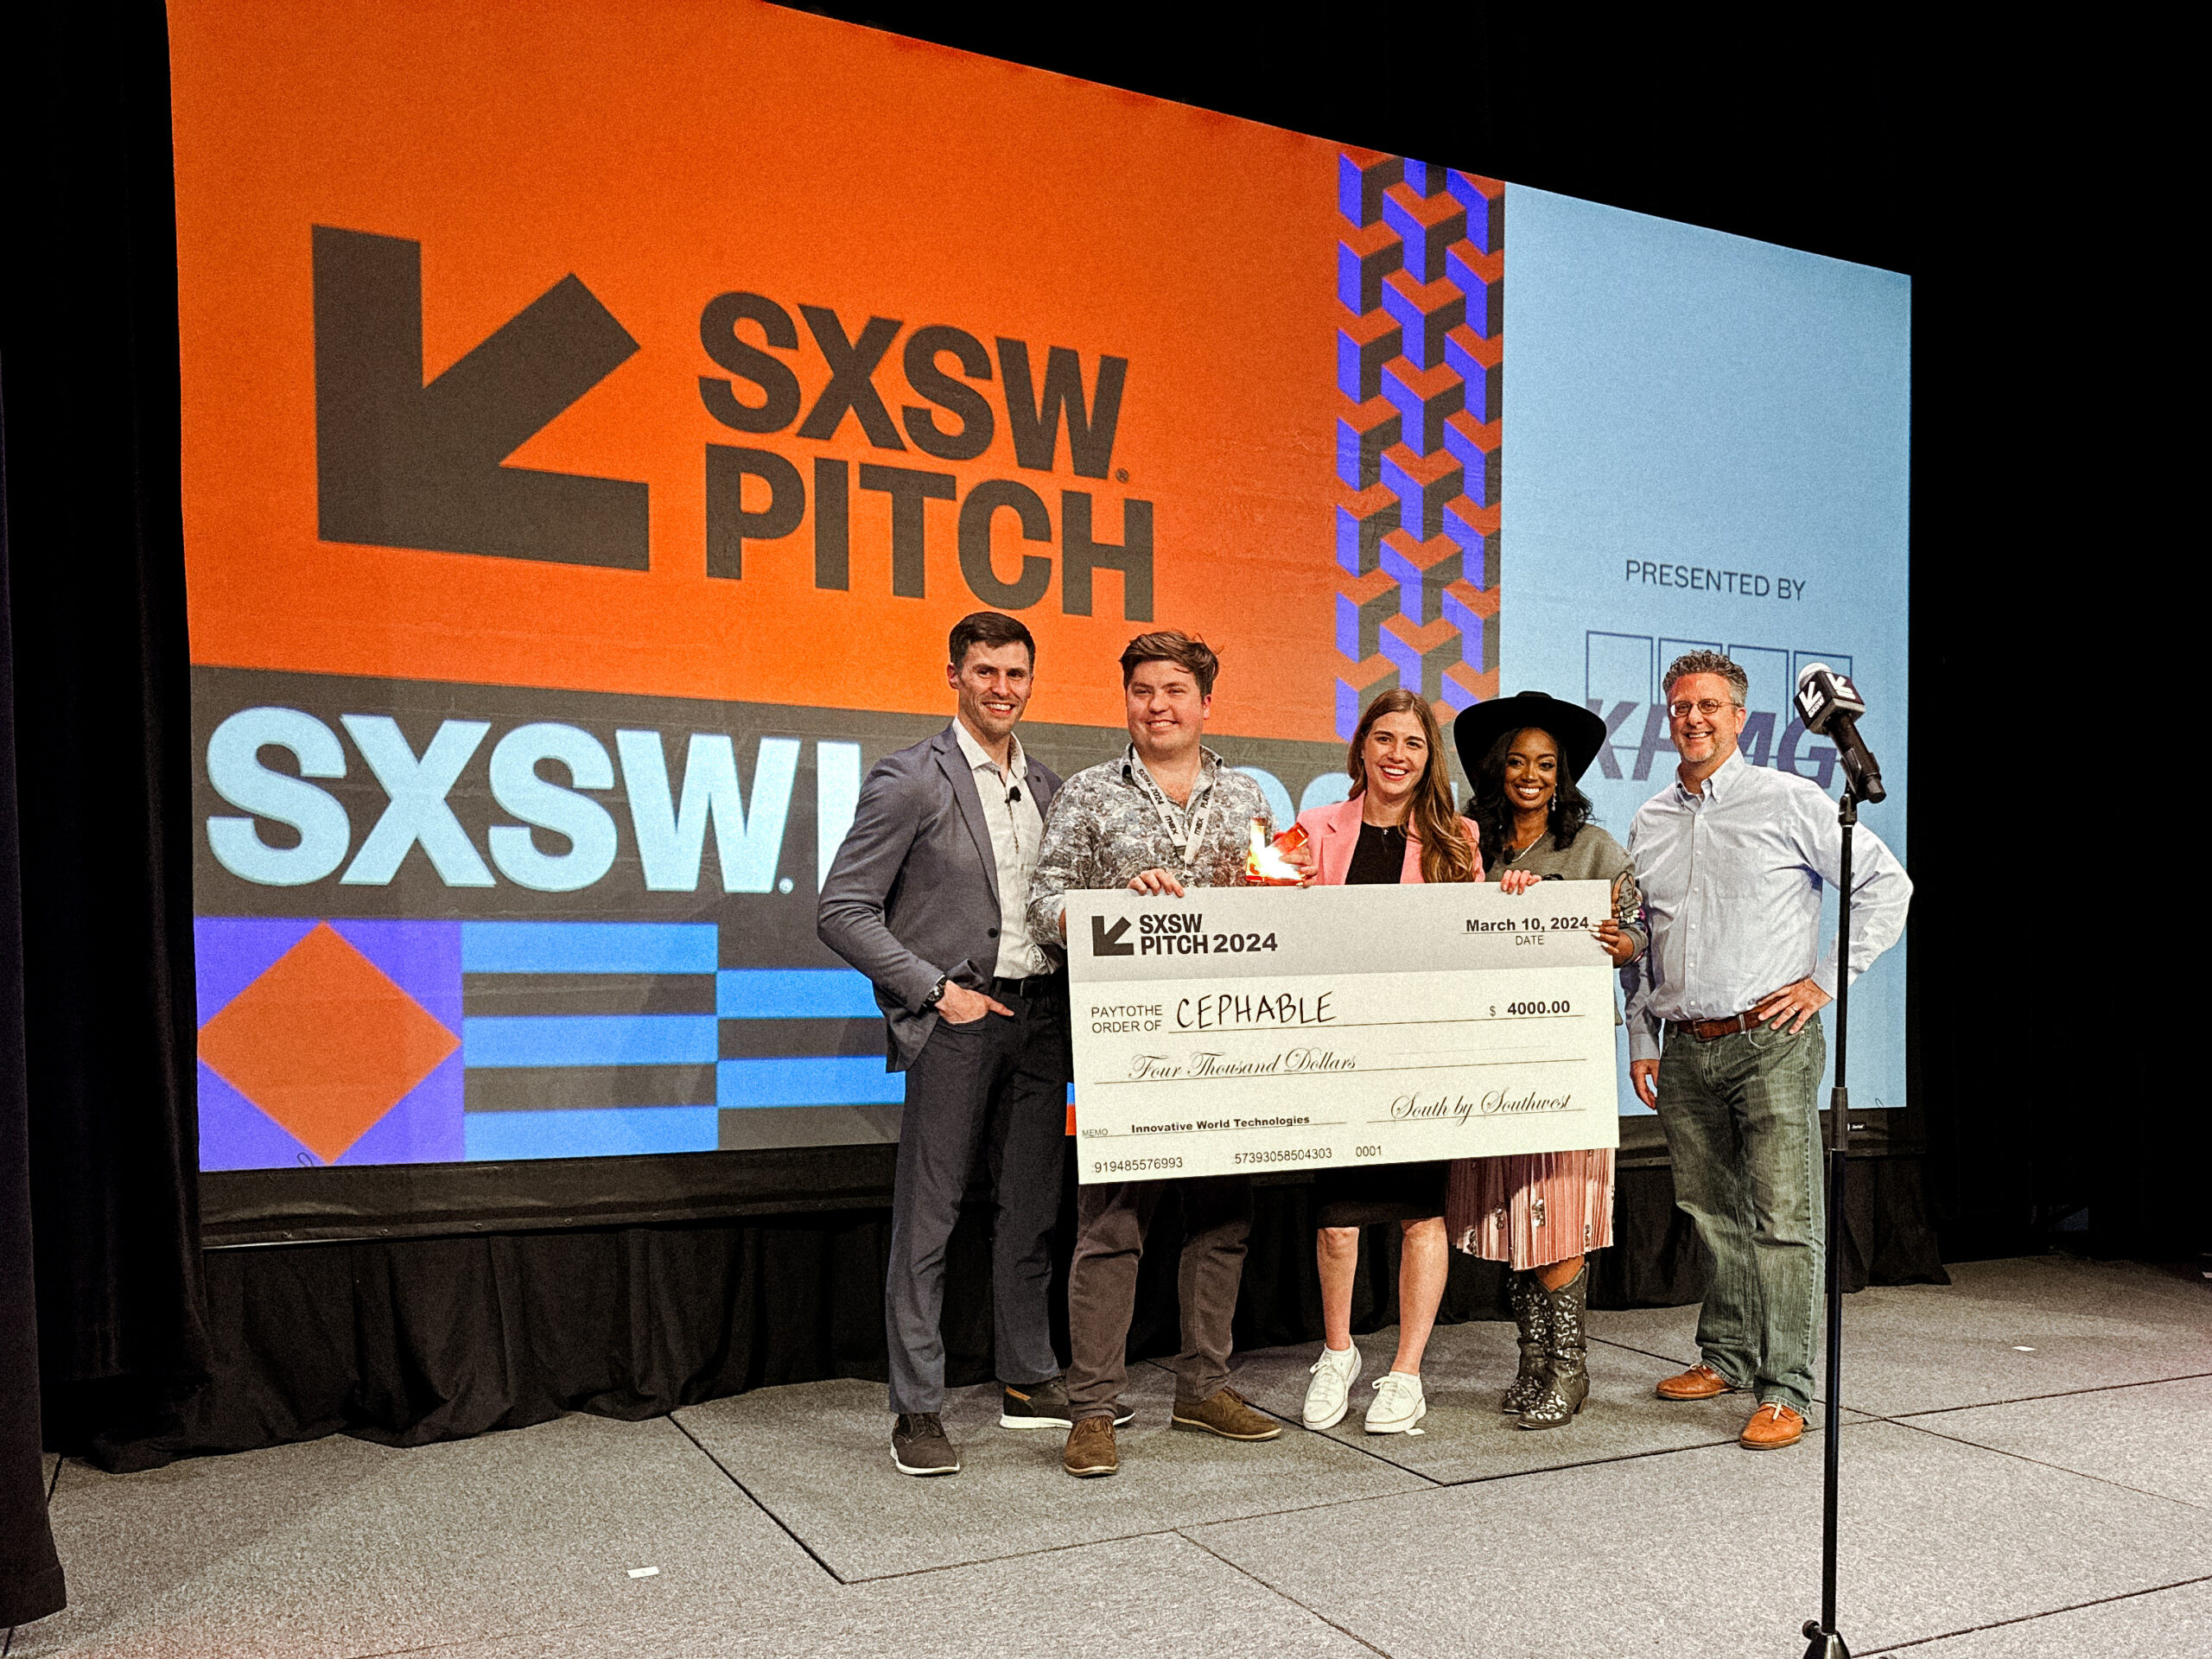 Cephable CEO Alex Dunn and Director of Marketing Alexa Orban stand on the SXSW Pitch stage holding an award and check. There are 3 members of the SXSW team on stage in alongside them and an orange SXSW Pitch banner in the background. 